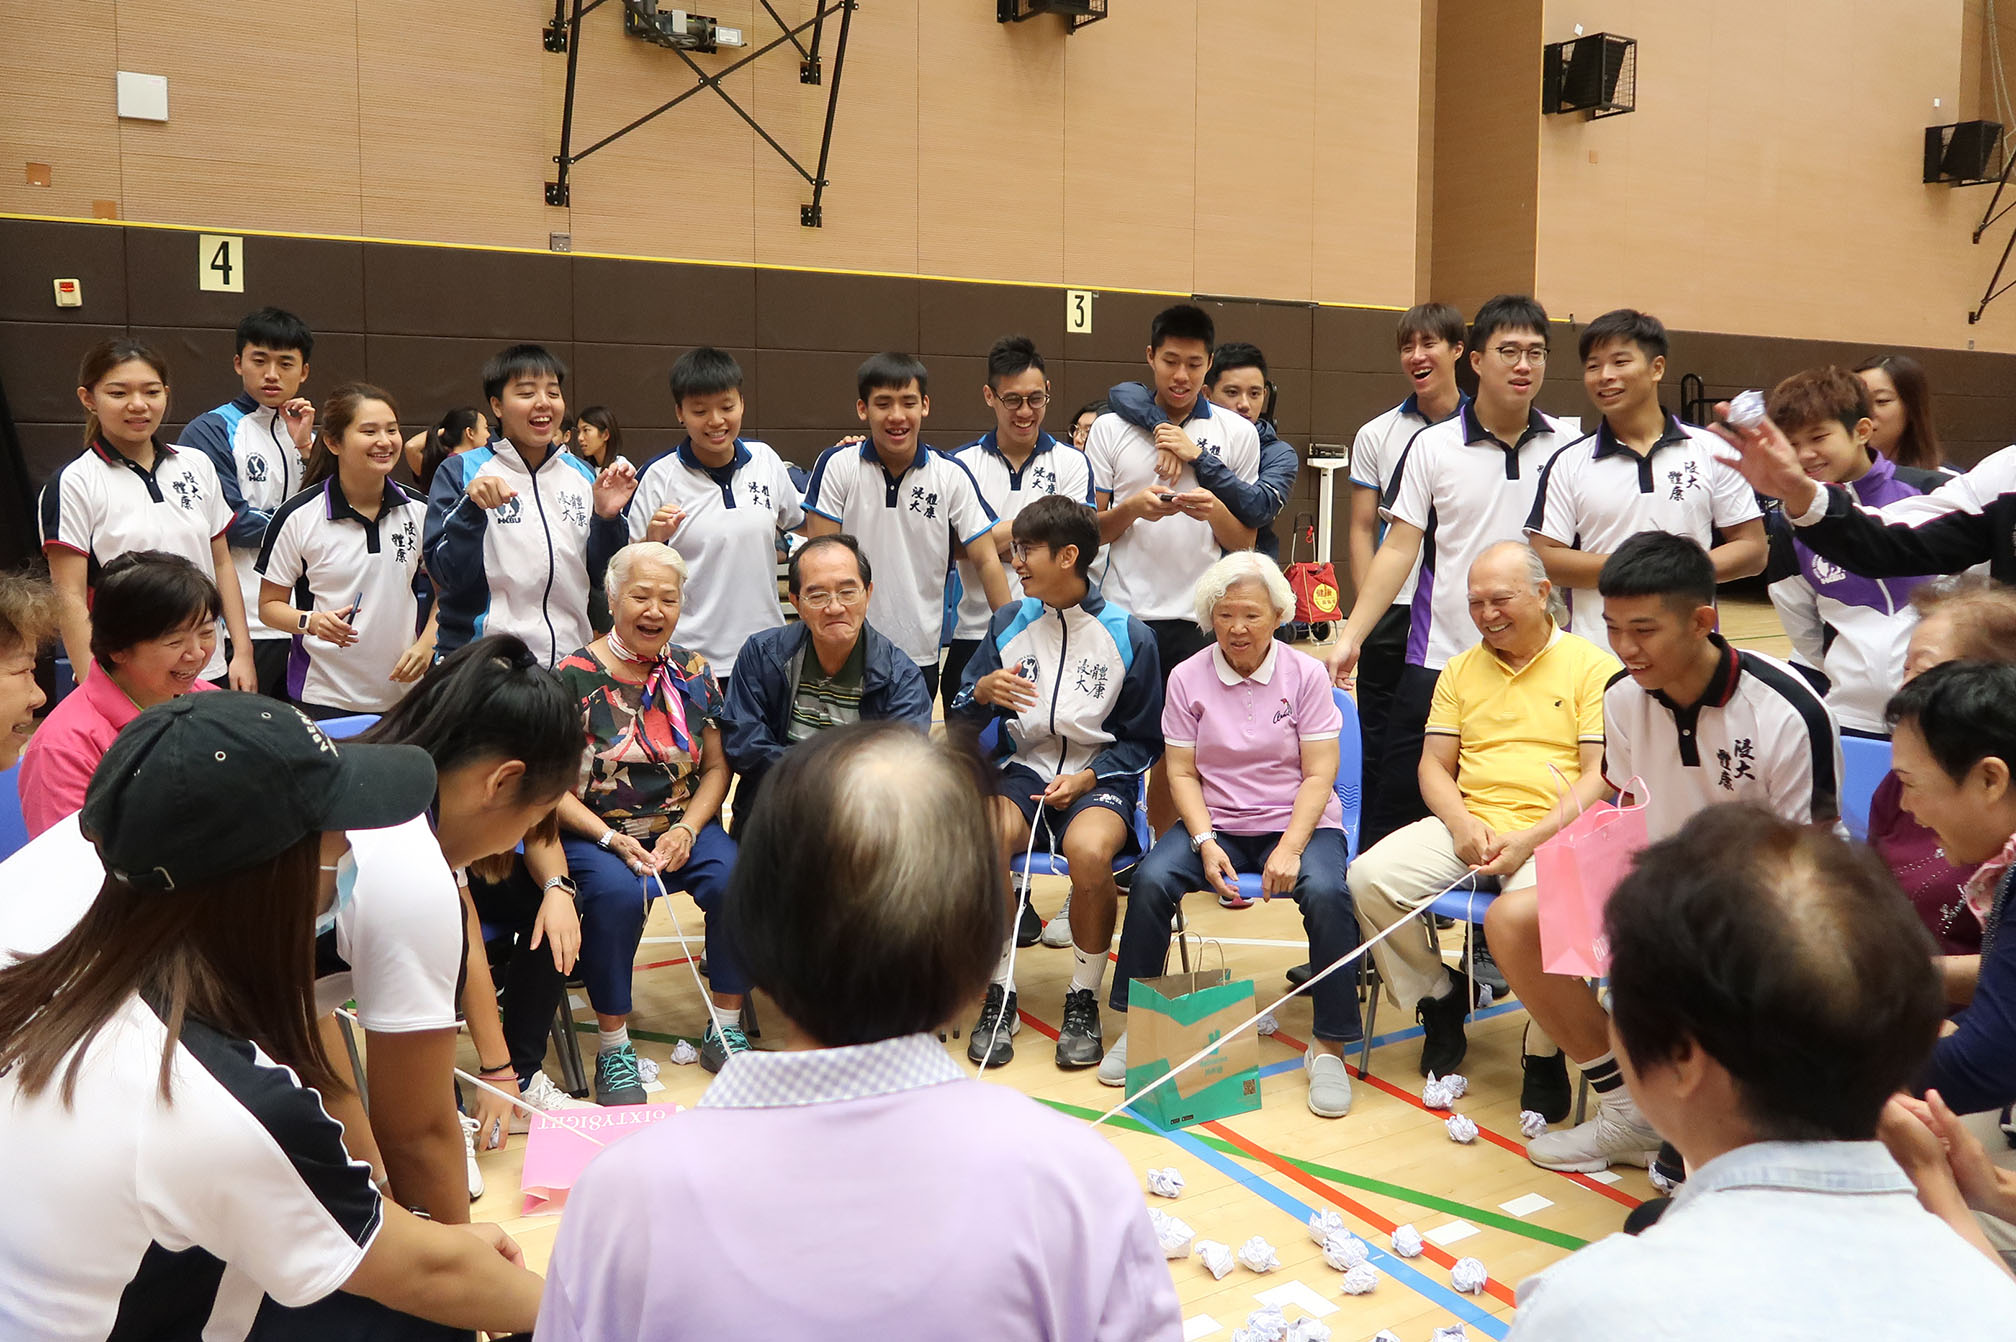 Students from the Department of Sport, Physical Education and Health design games to play and engage with the elderly.